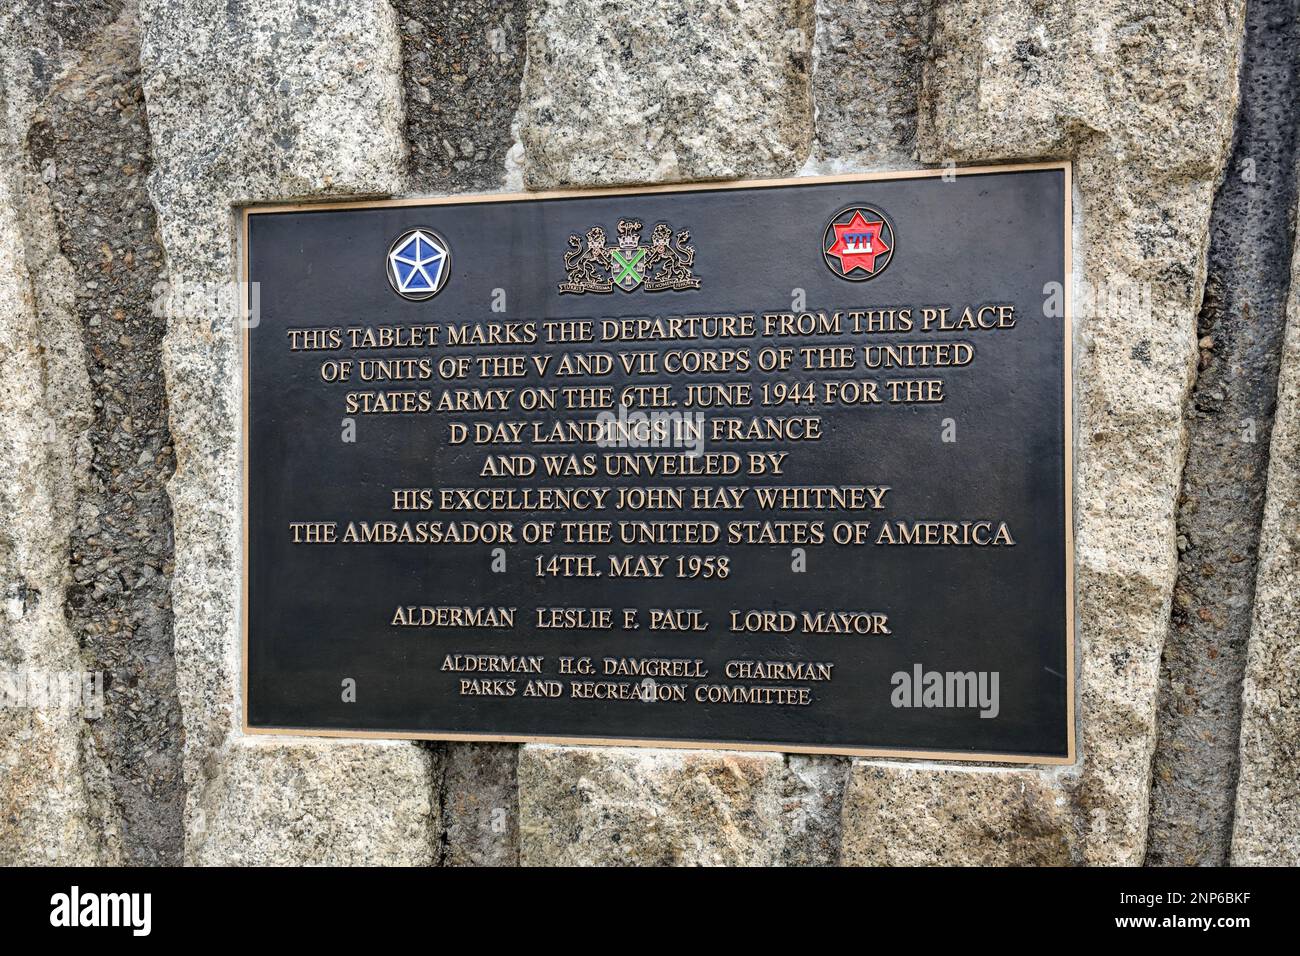 Plaque on the Saltash Passage Memorial to the V and VII Corps of the United States Army for D Day landings in France. Detailed close up. Stock Photo